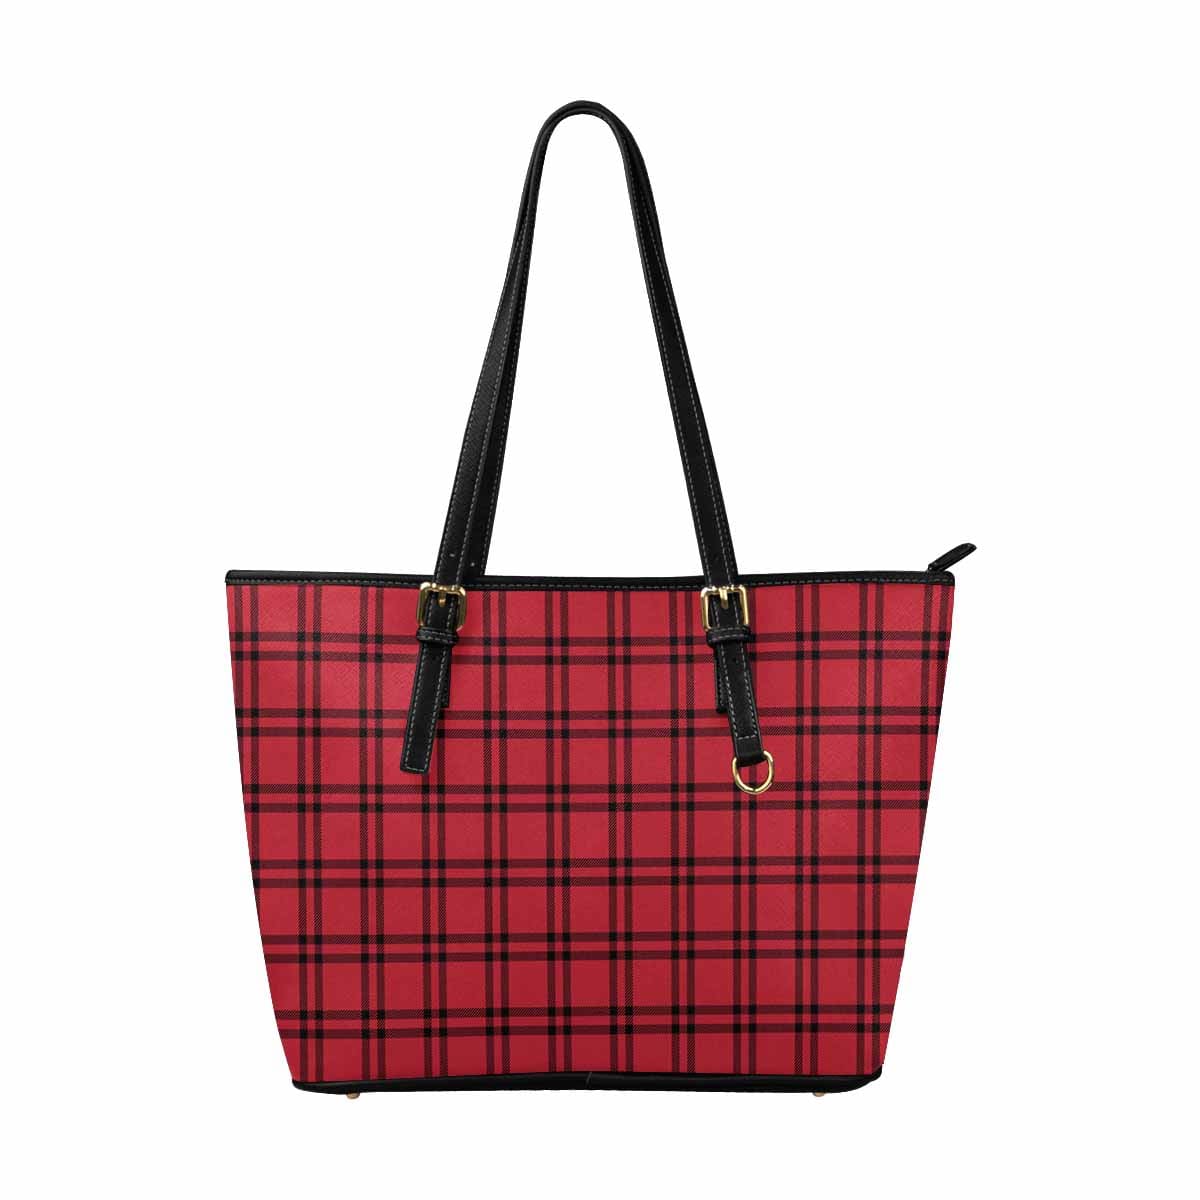 Large Leather Tote Shoulder Bag - Buffalo Plaid Red And Black S954654 - Bags |